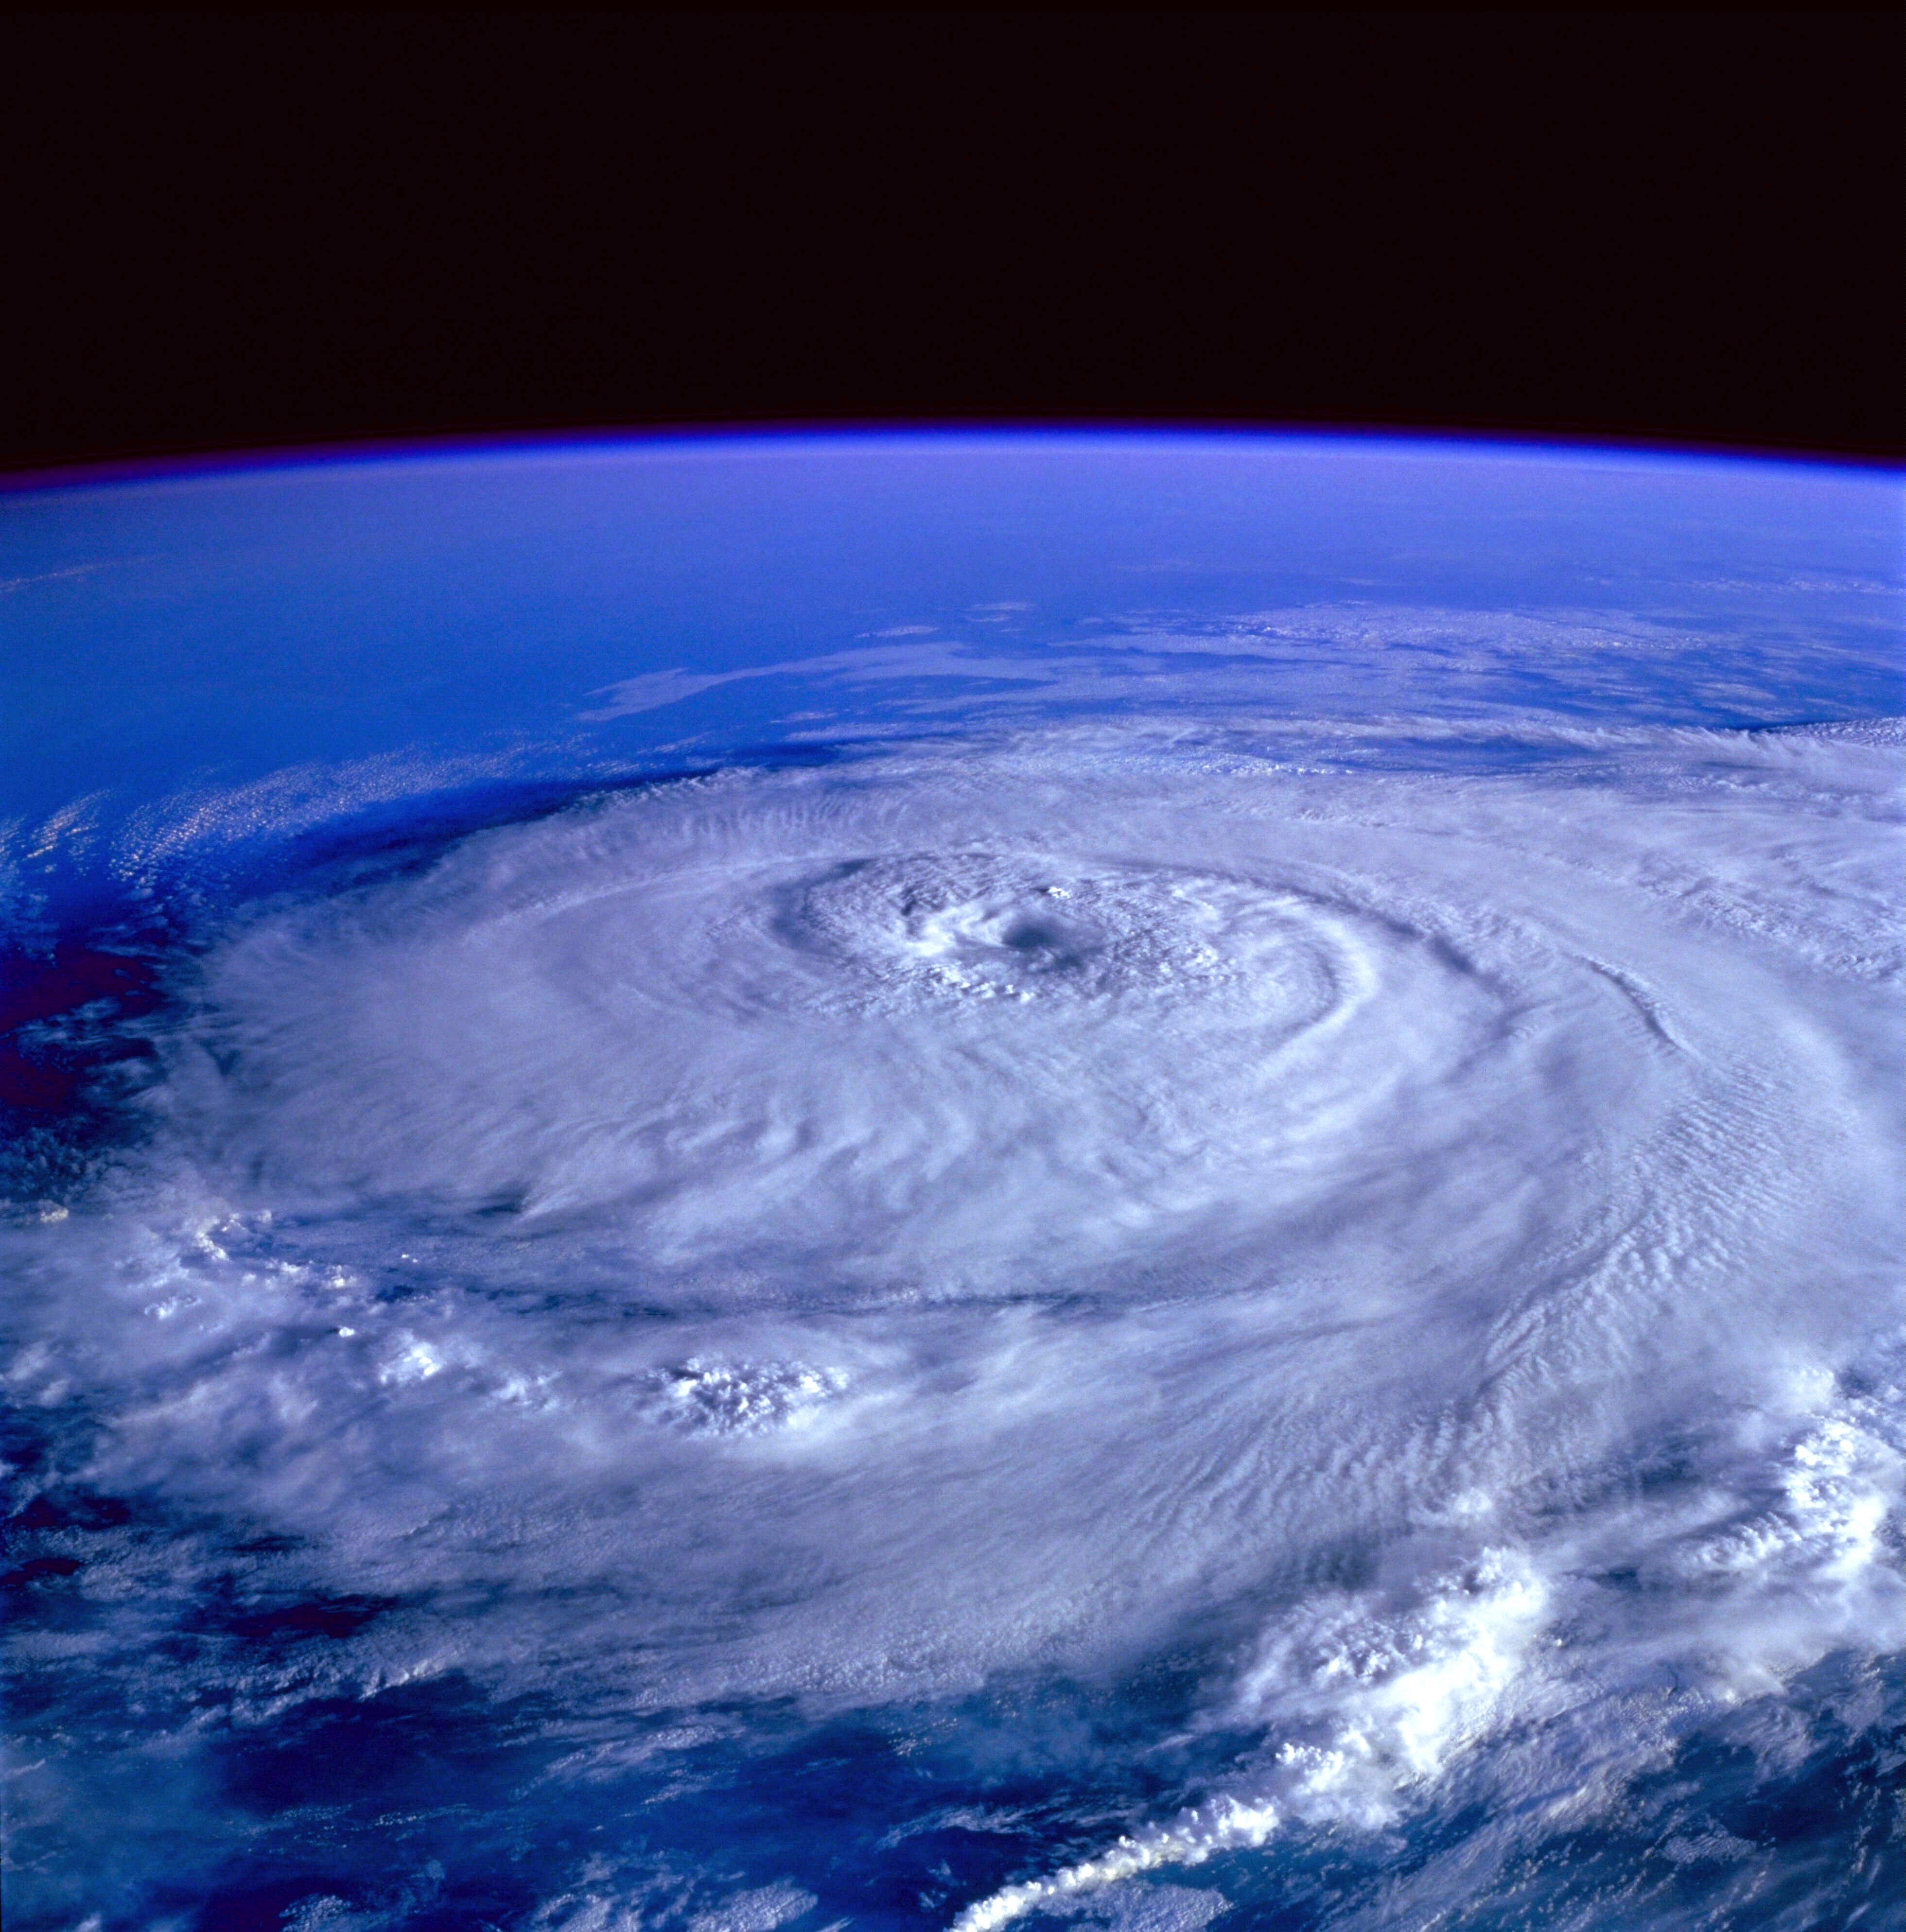 Eye of the storm image from outer space photo